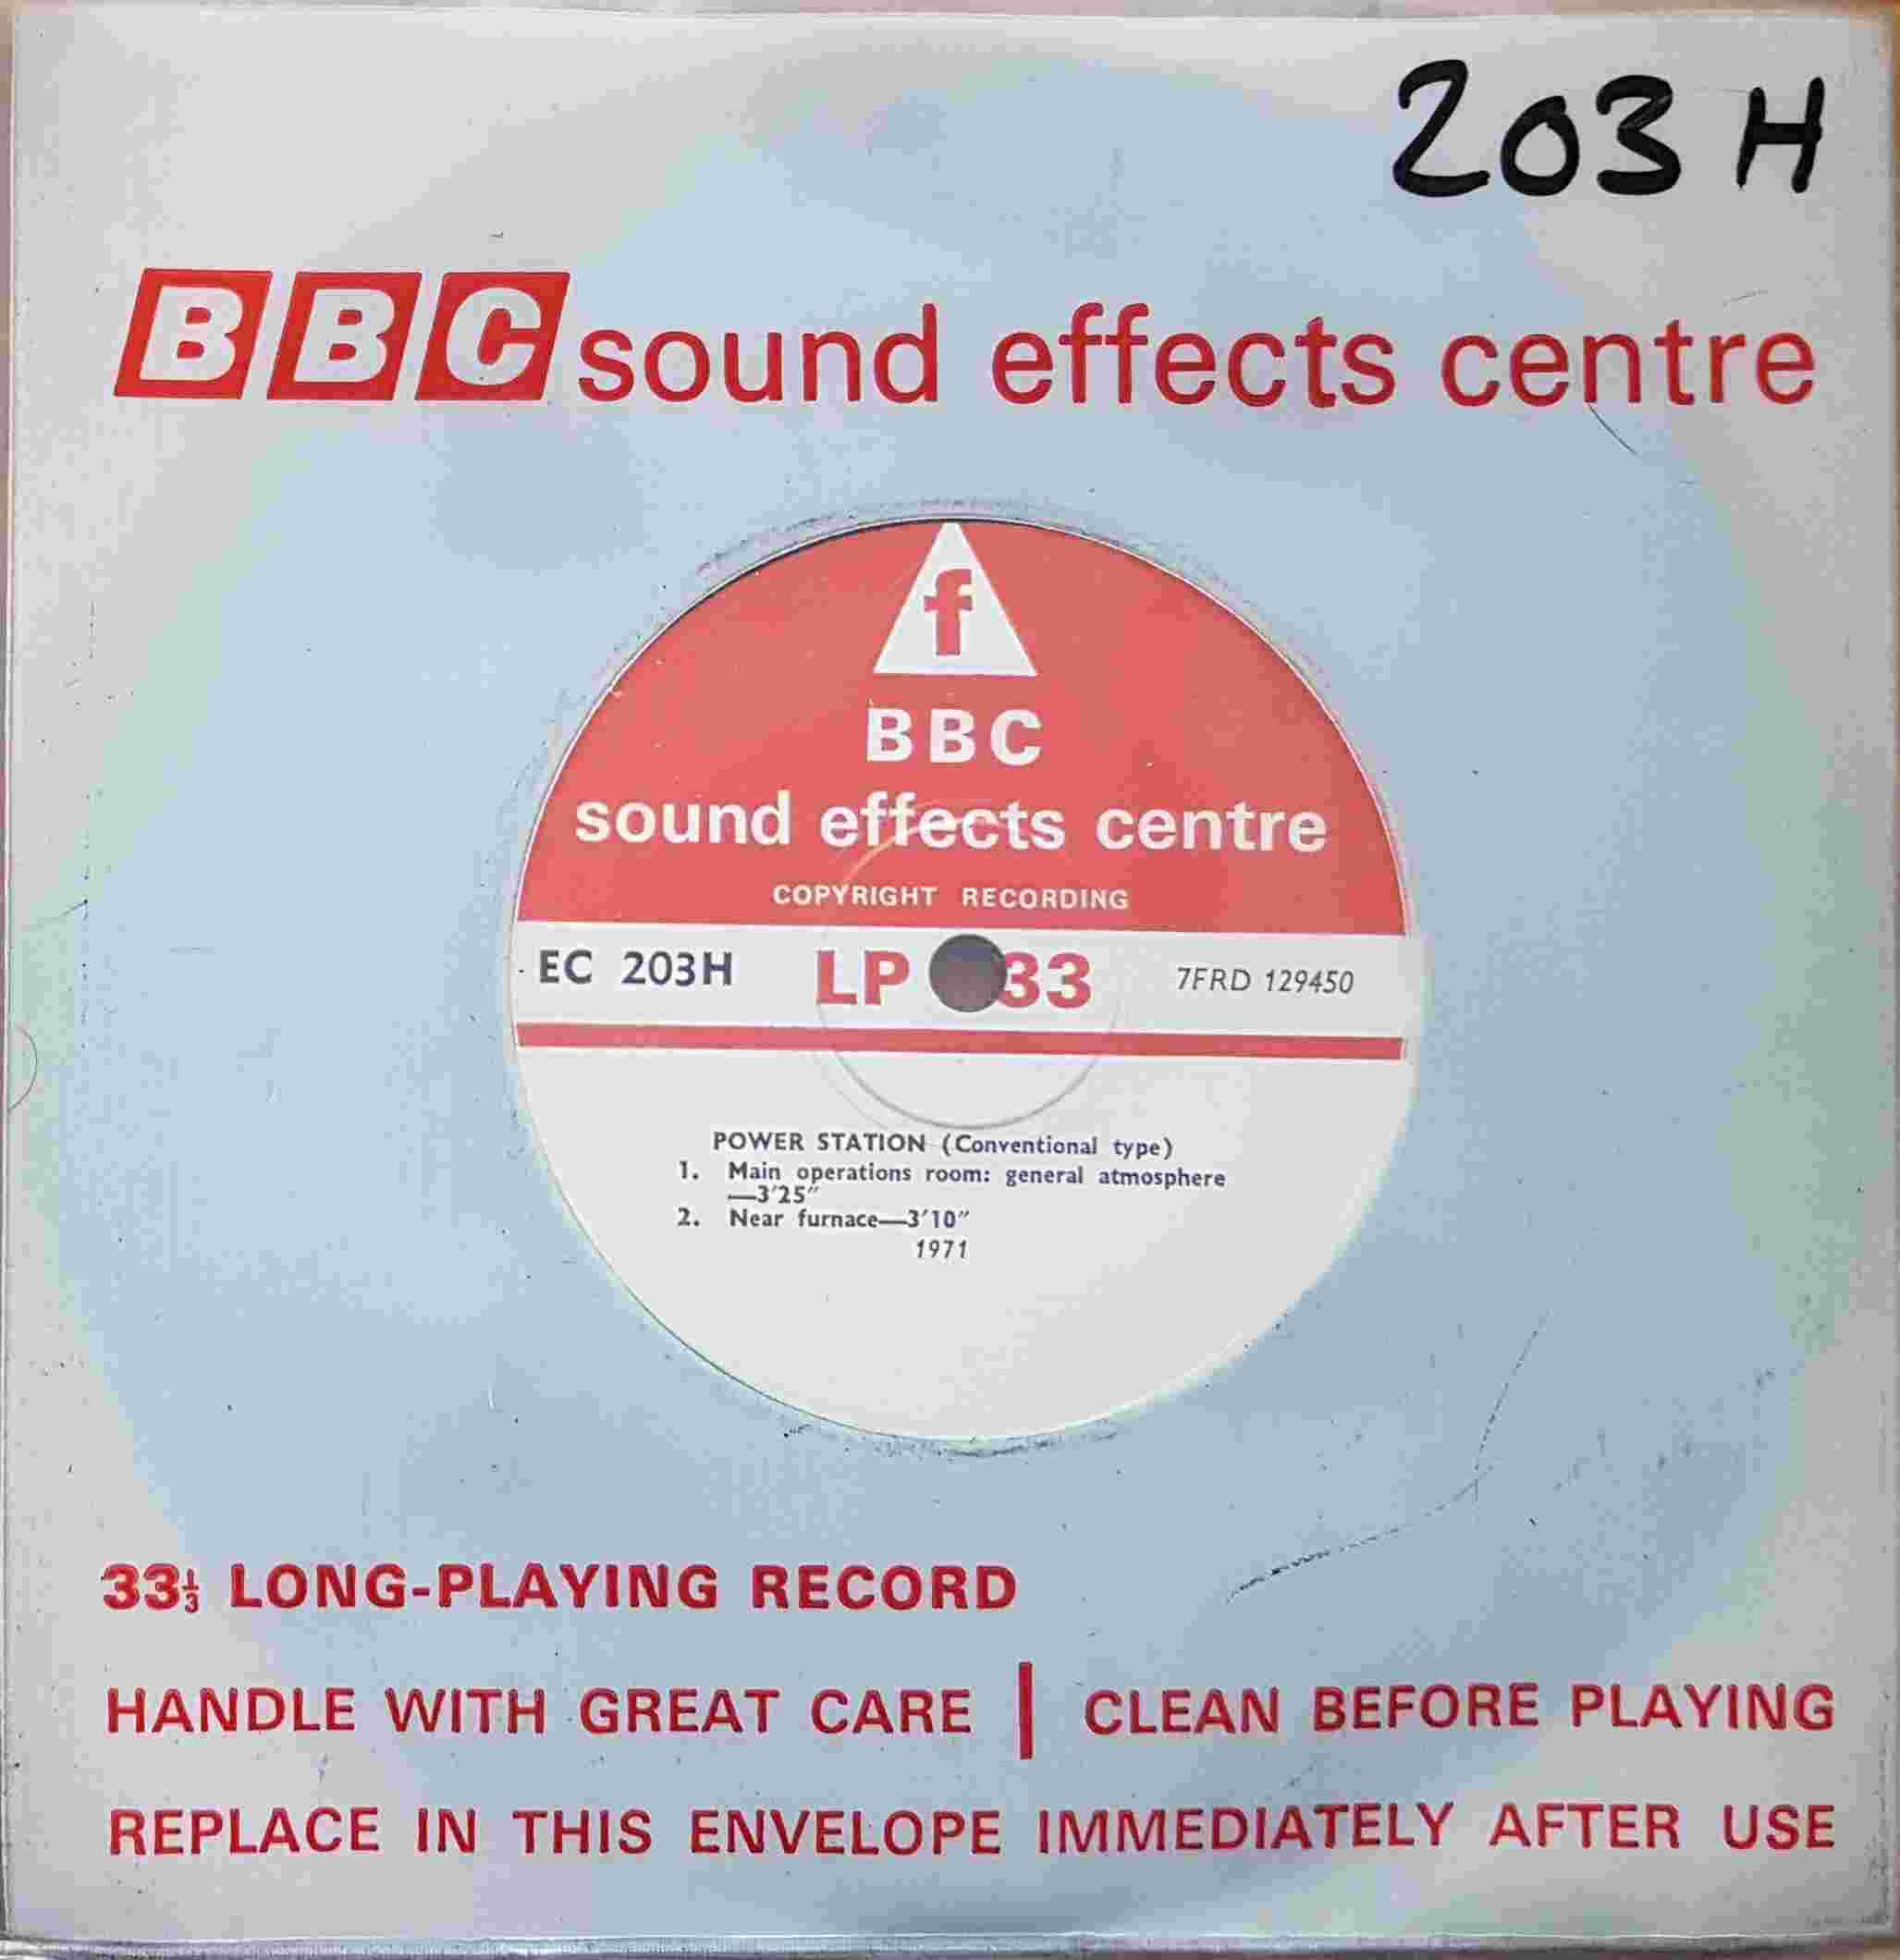 Picture of EC 203H Power station (Conventional type) by artist Not registered from the BBC singles - Records and Tapes library